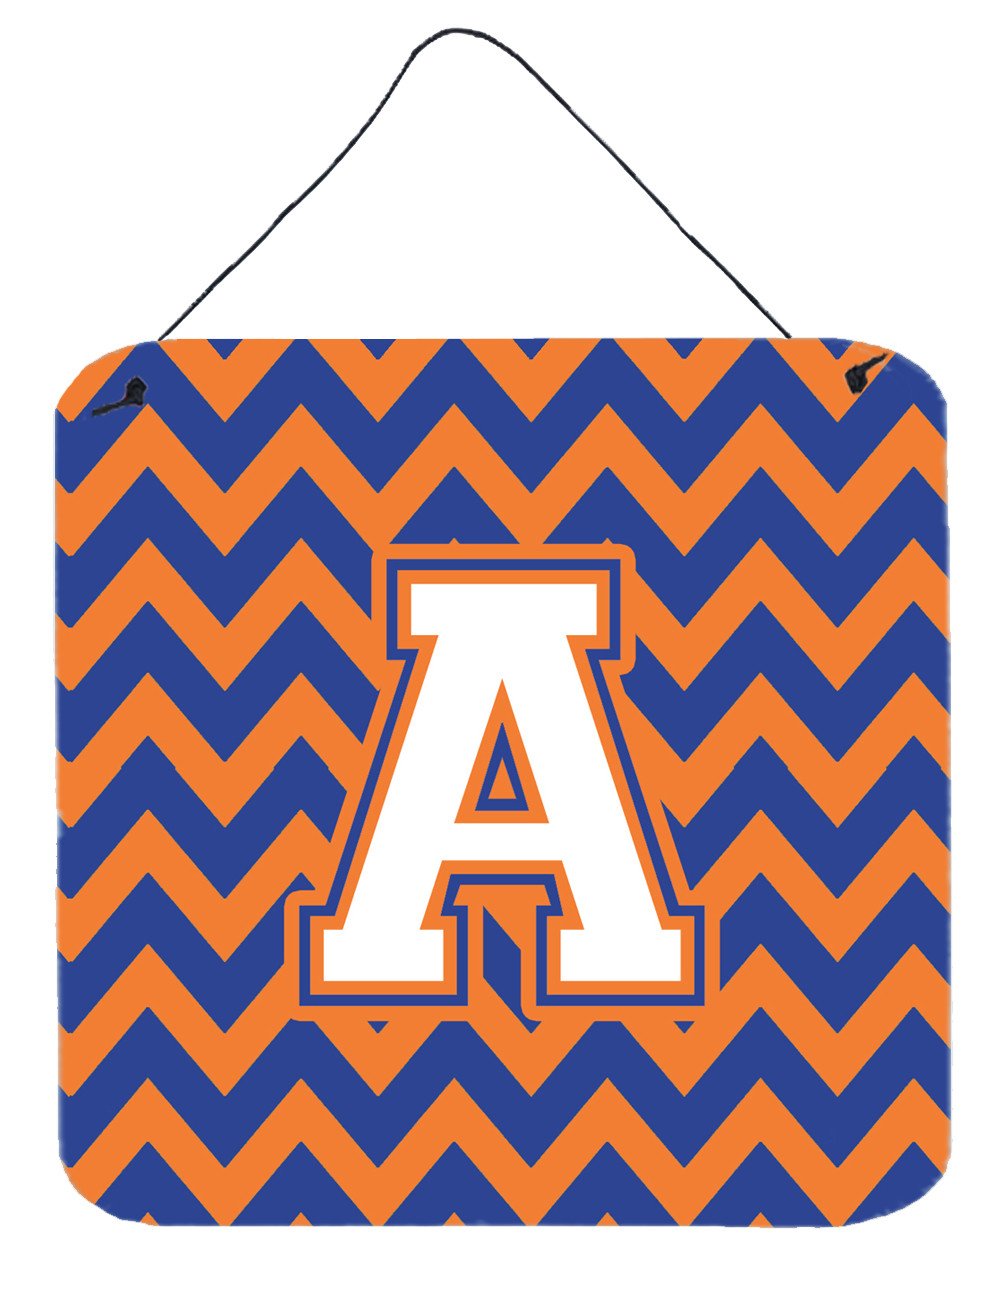 Letter A Chevron Blue and Orange #3 Wall or Door Hanging Prints CJ1060-ADS66 by Caroline's Treasures